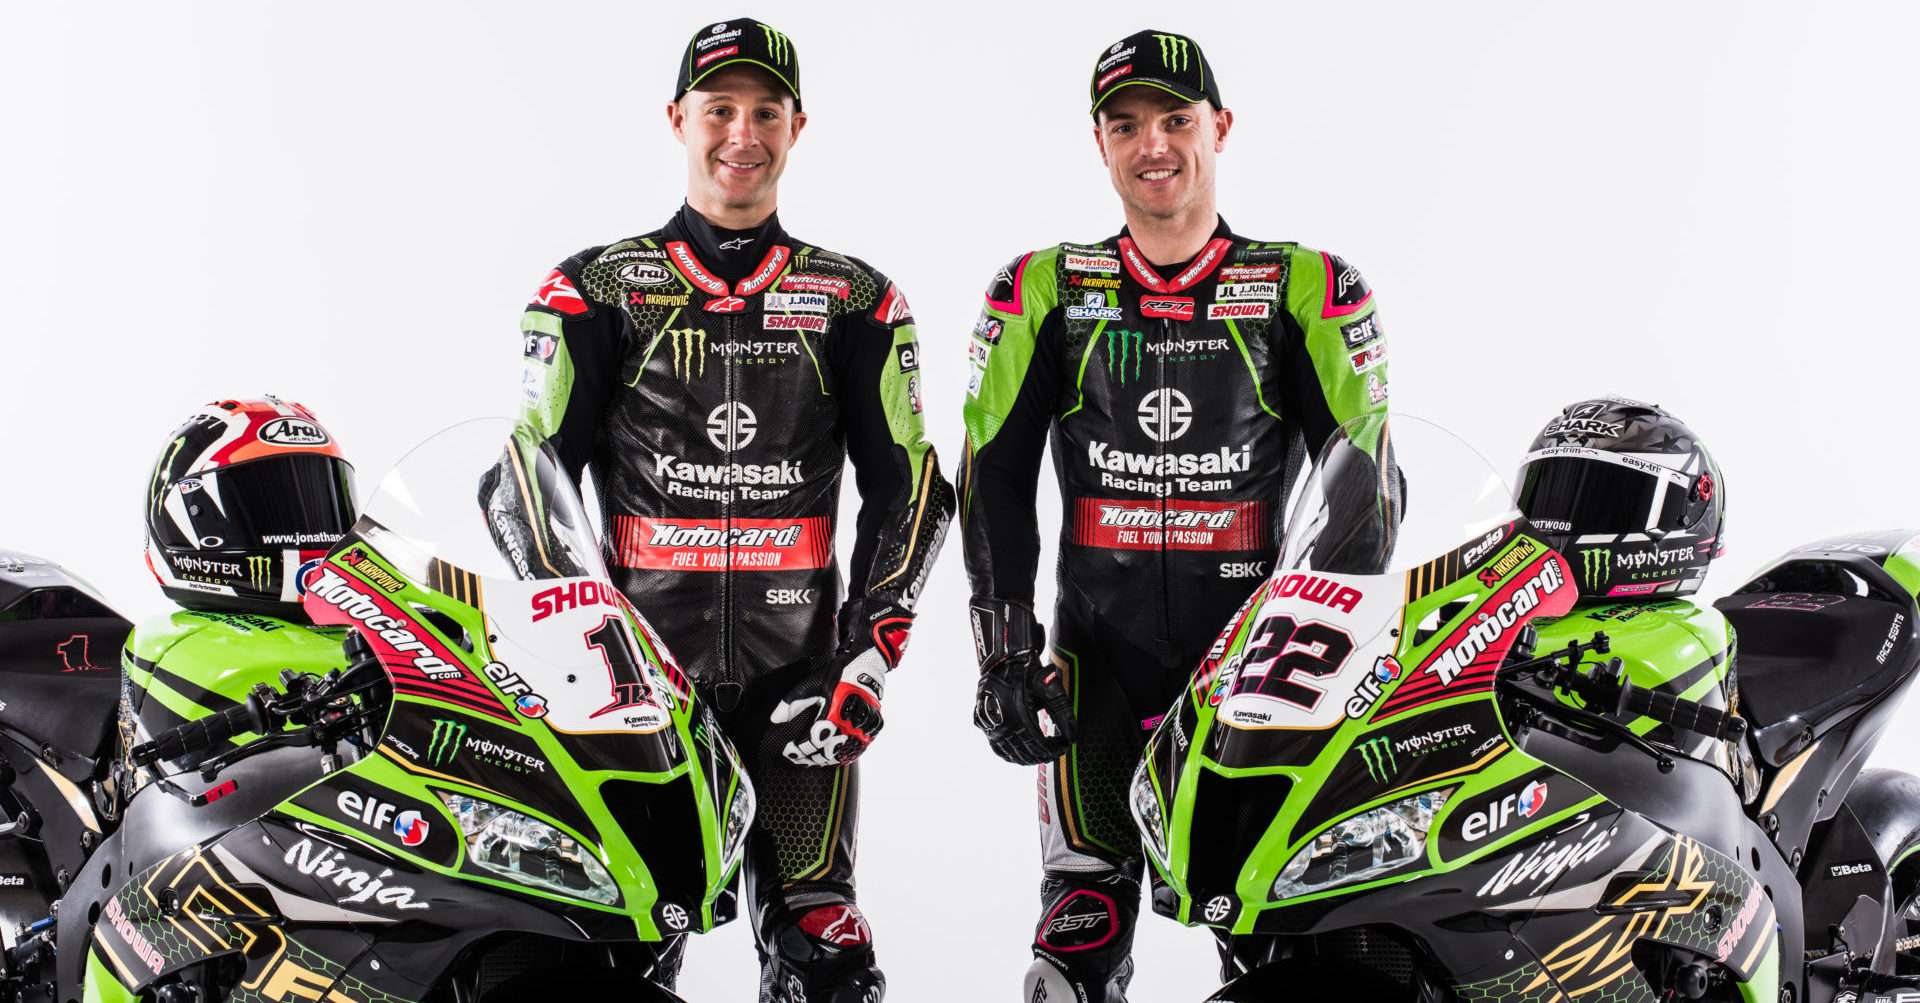 ankomme detektor rulle World Superbike: Kawasaki Racing Team Officially Launched In Spain -  Roadracing World Magazine | Motorcycle Riding, Racing & Tech News